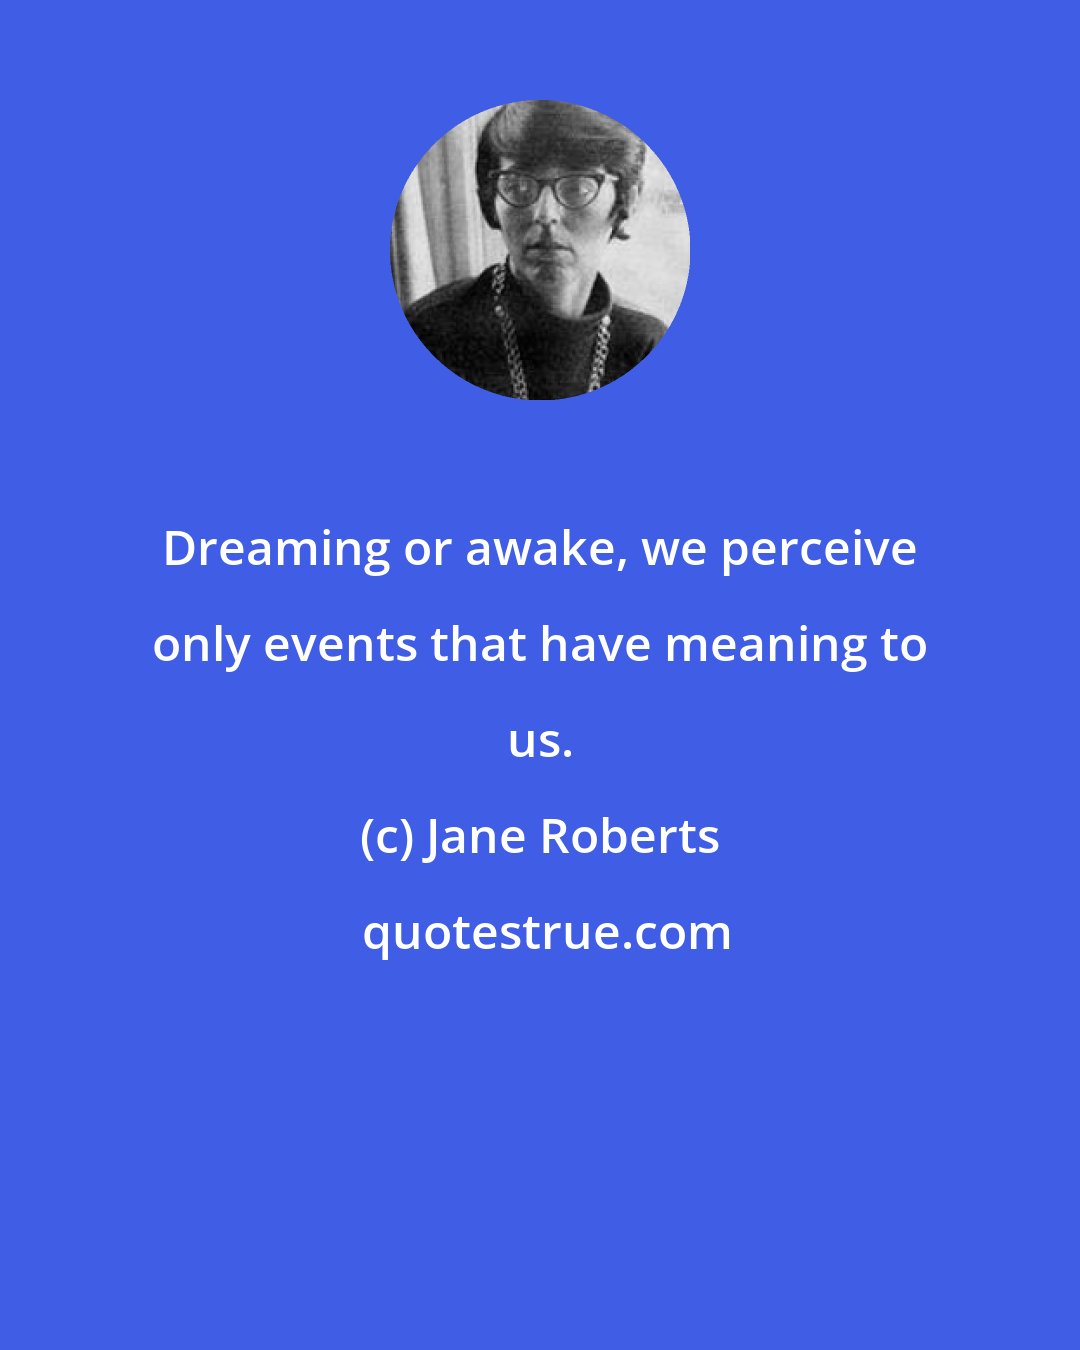 Jane Roberts: Dreaming or awake, we perceive only events that have meaning to us.